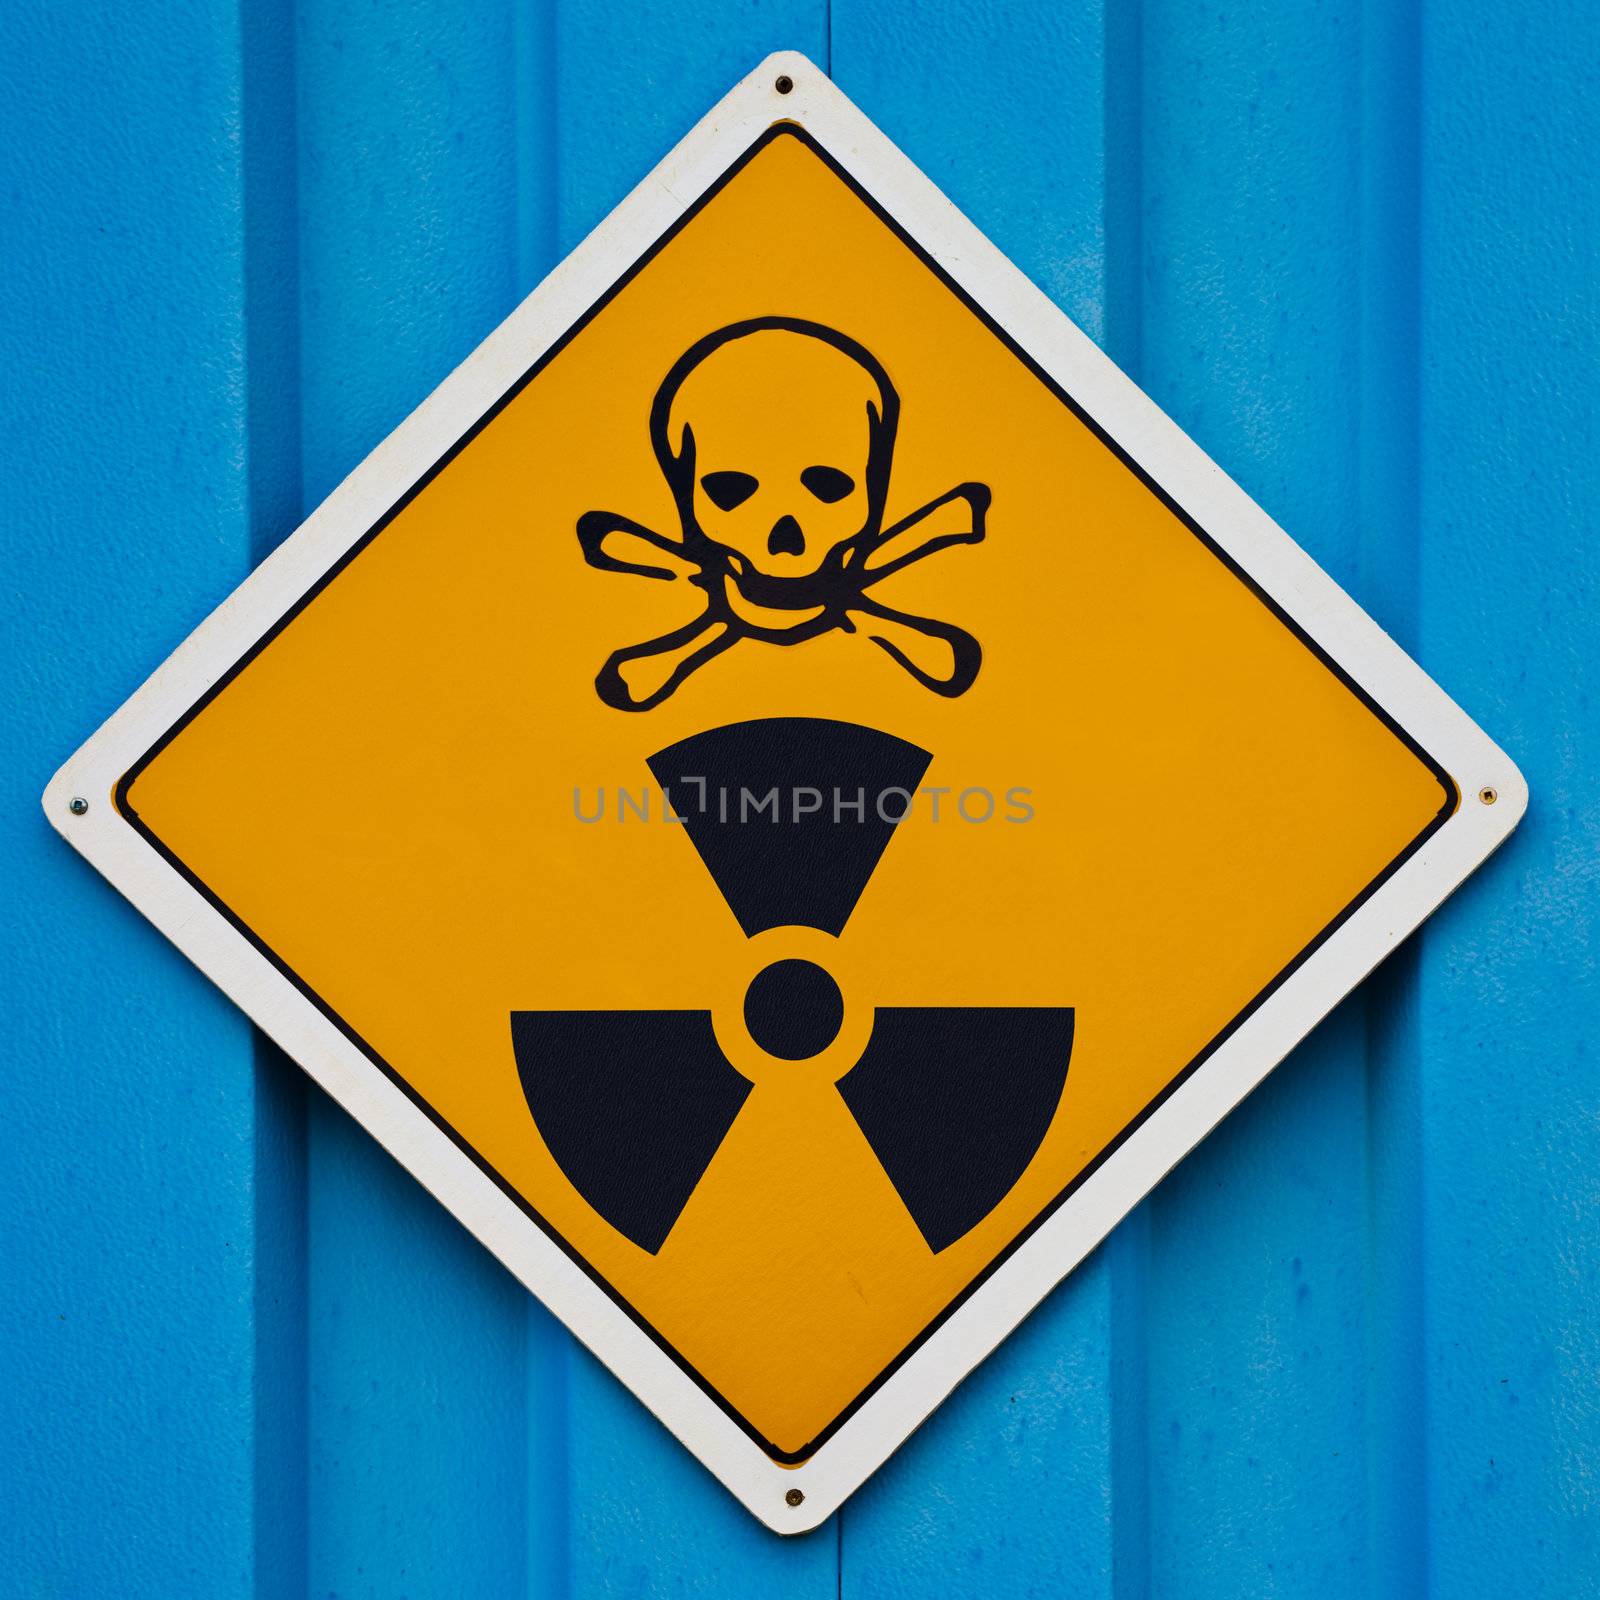 Deadly nuclear radiation warning sign with skull and crossbones on blue background.